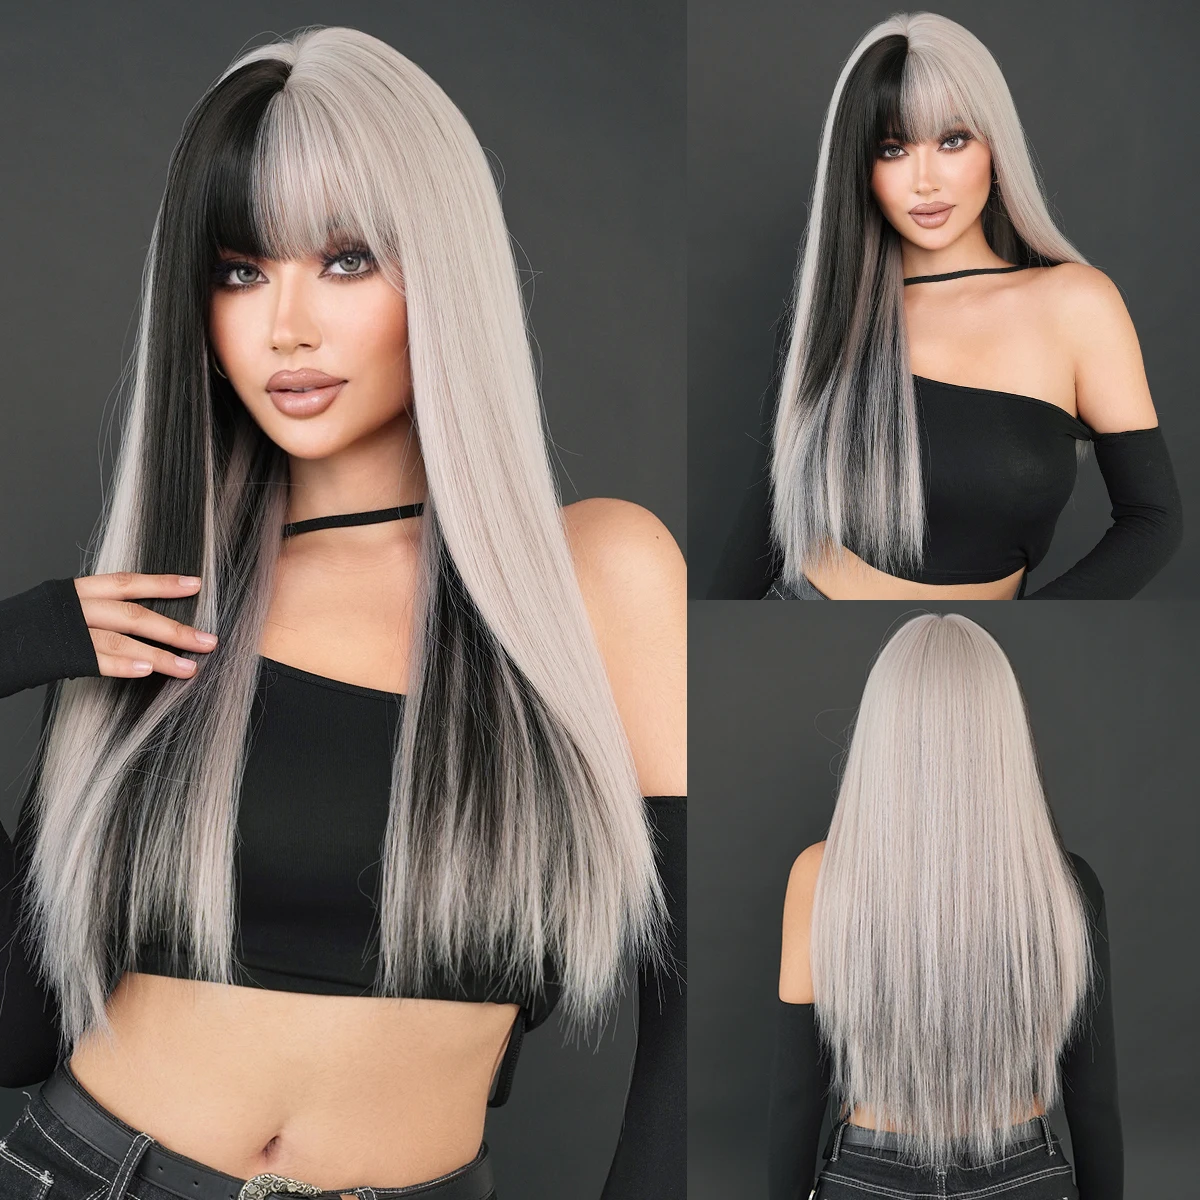 NAMM Long Body Straight Silver Ash Hair Wig With Bangs For Women Daily Party High Density Hair Ombre Wigs Heat Resistant Fiber